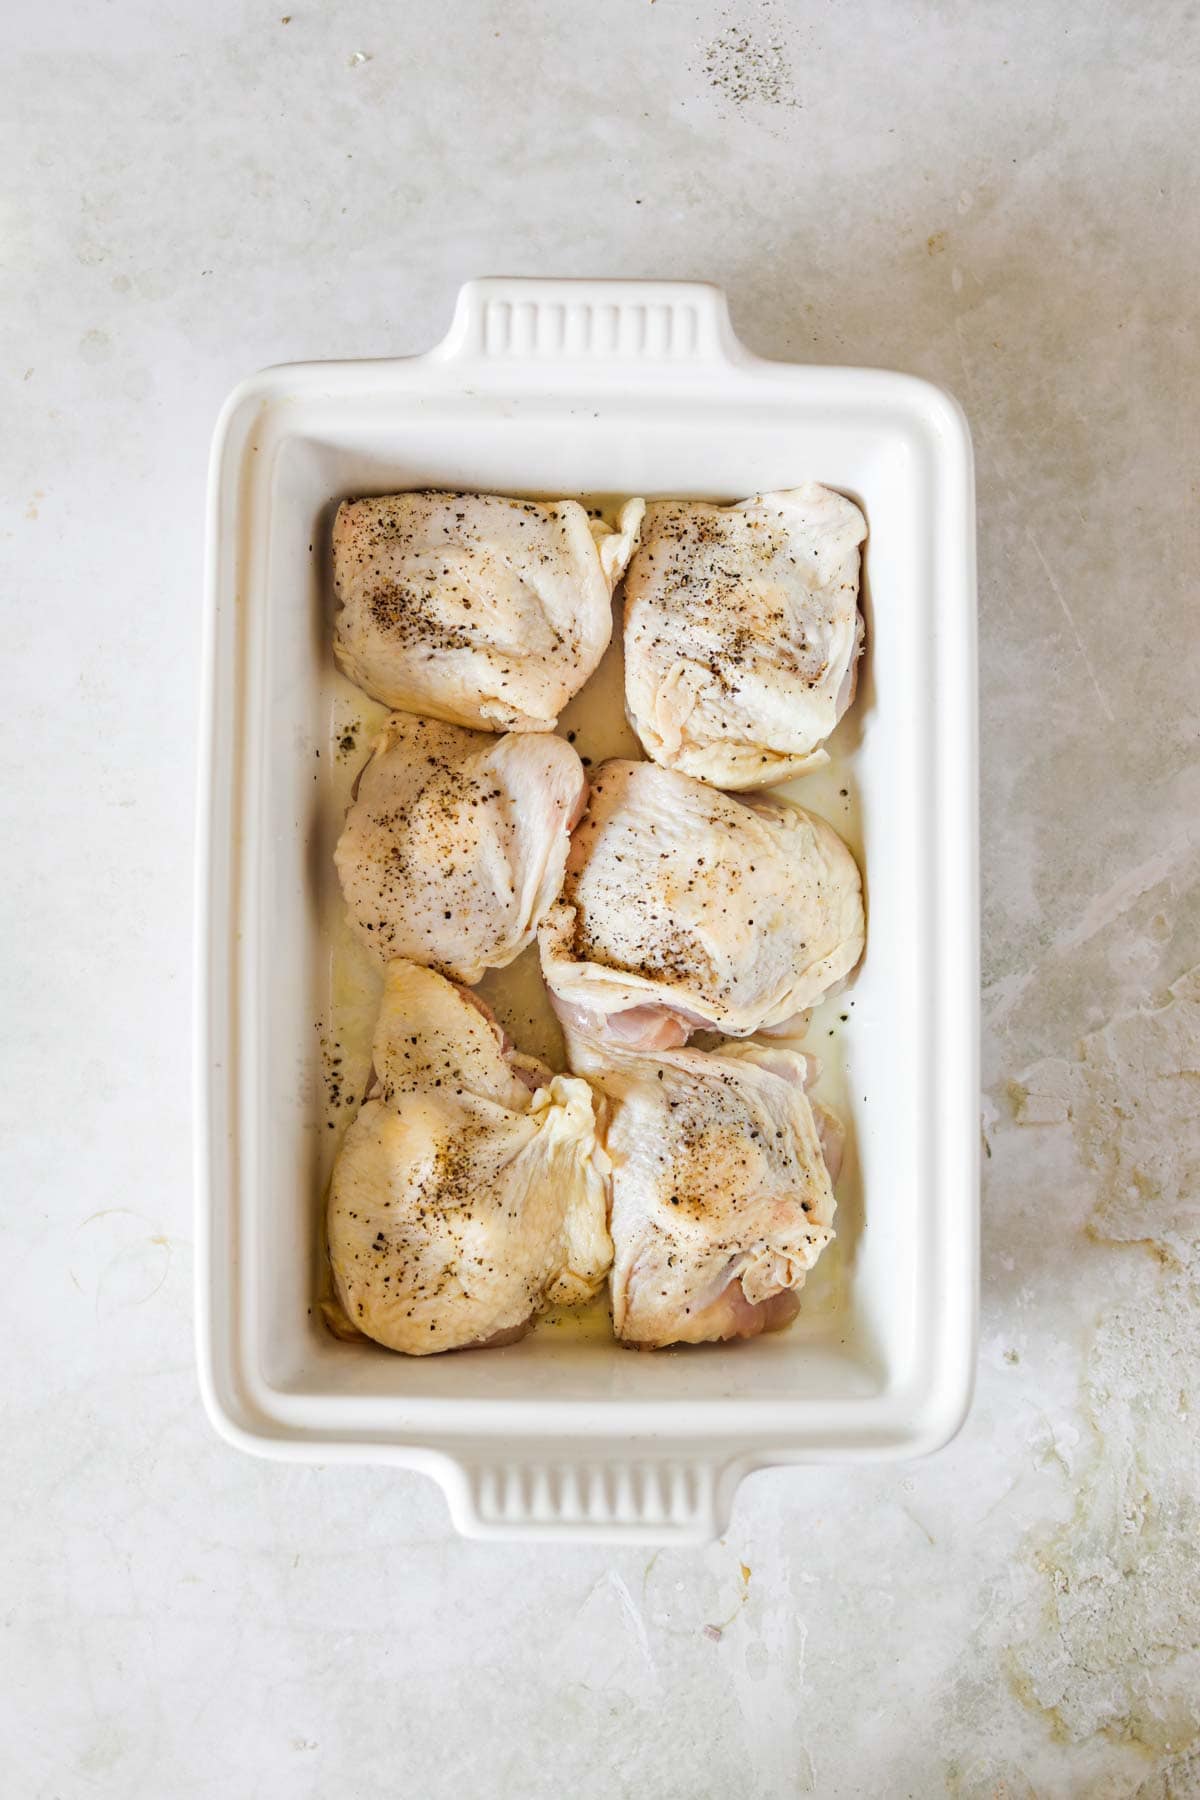 Seasoned chicken thighs in a white Le Creuset baking dish.